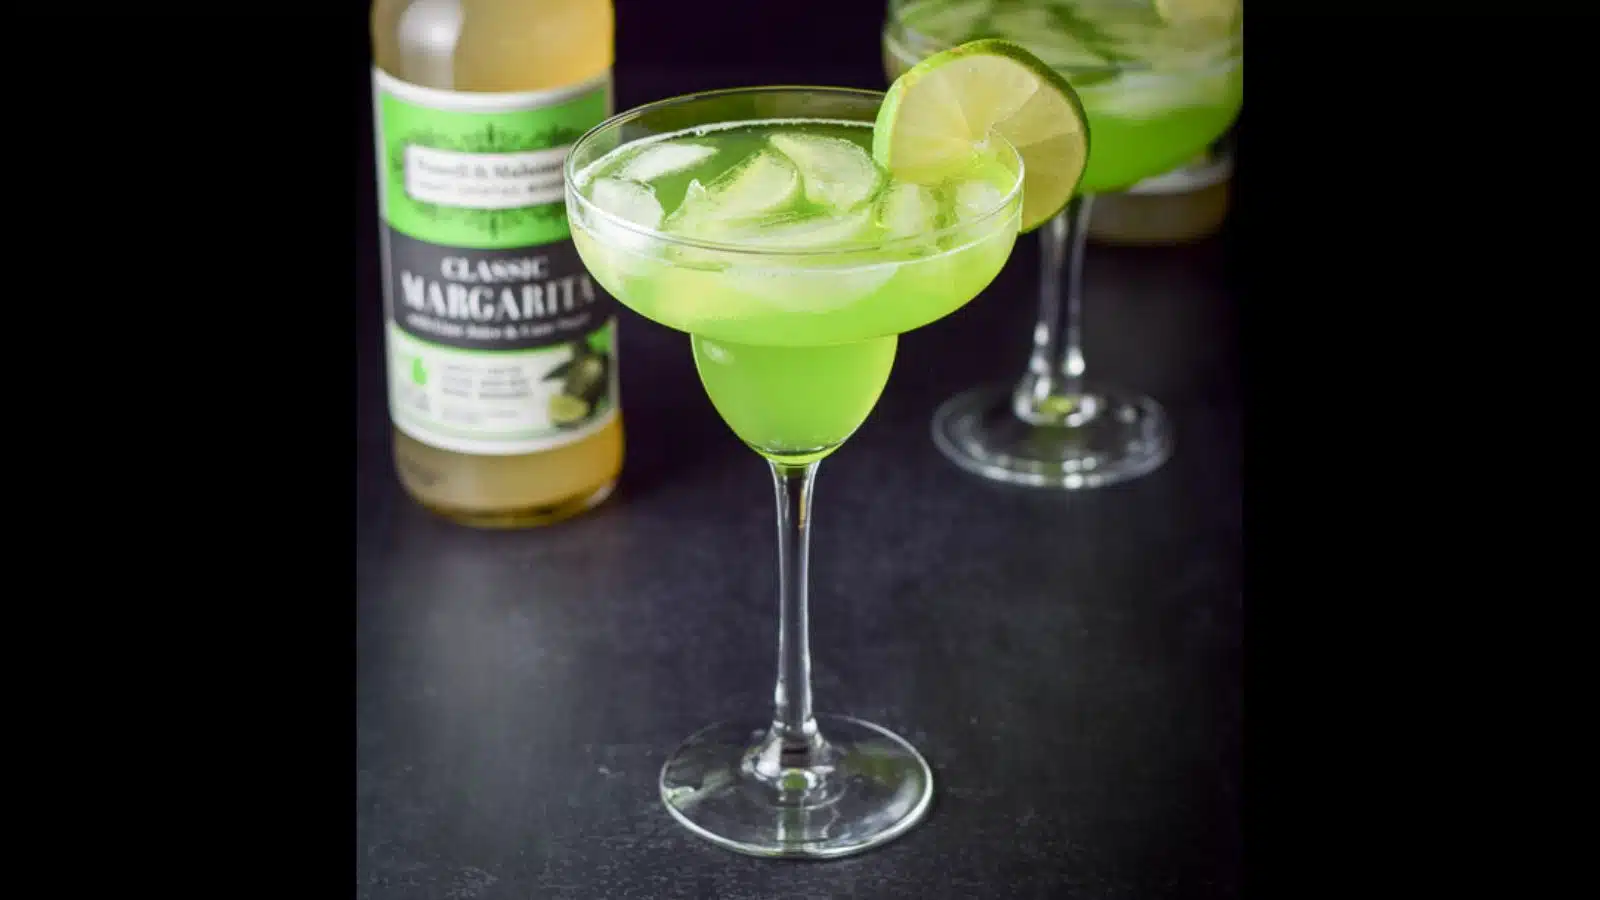 A classic margarita glass filled with a melon margarita with lime as garnish